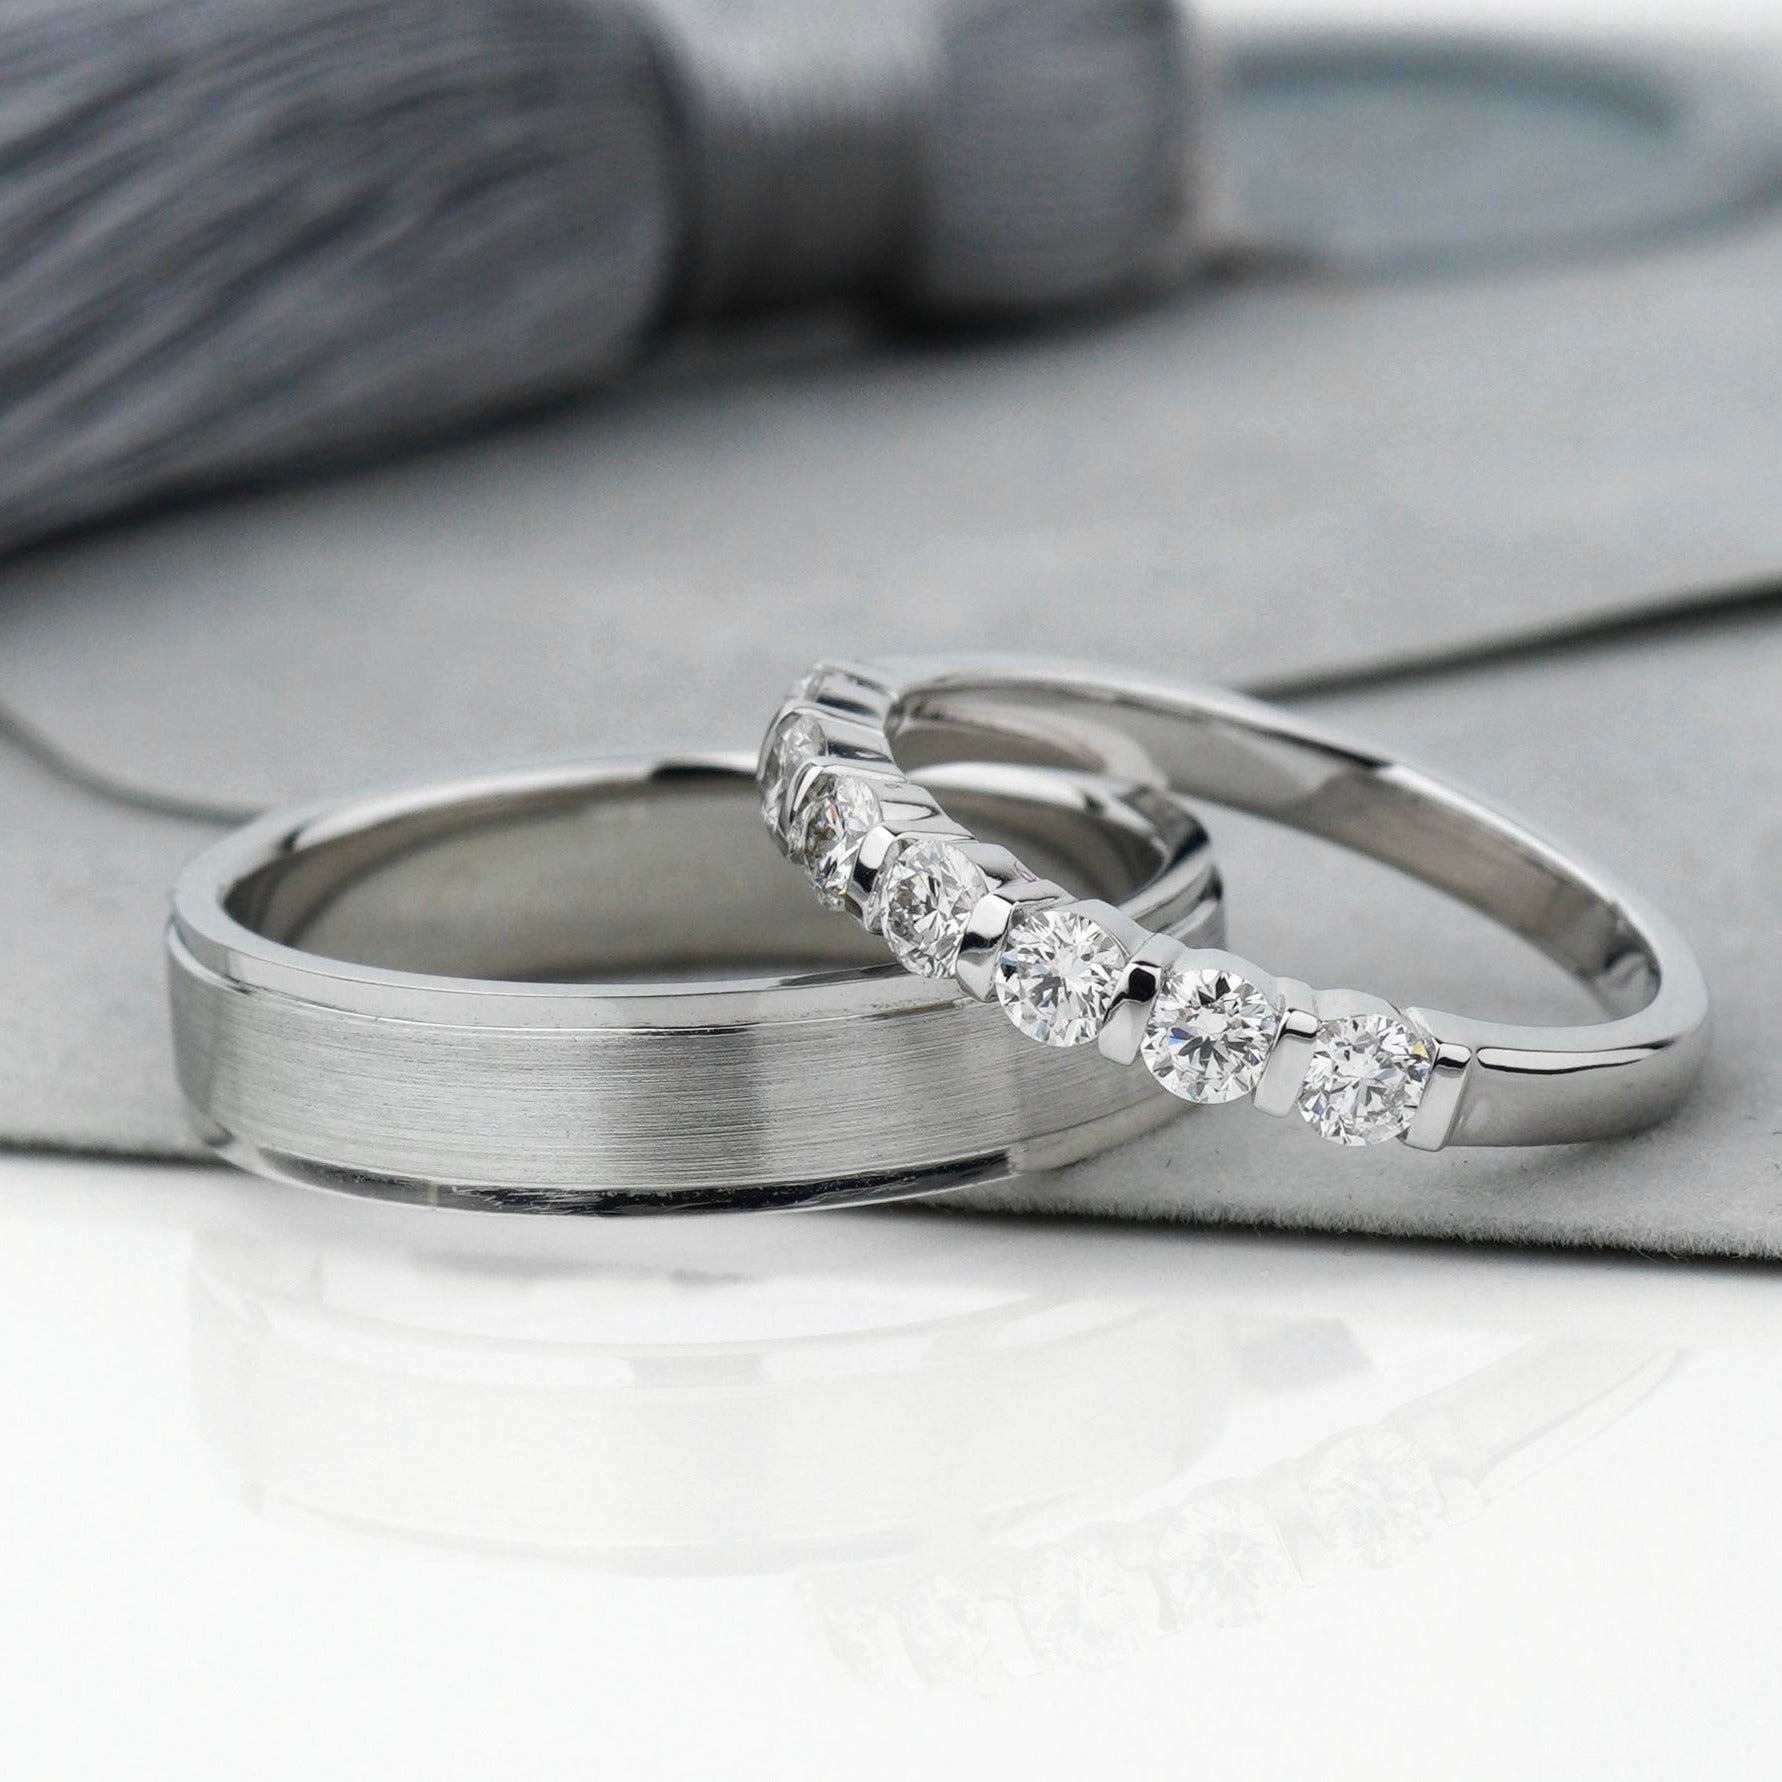 white gold wedding bands with diamonds, his and hers wedding rings set, matching wedding bands for couples, gold couple rings , gold diamond bands, wedding set his and hers, natural diamonds wedding bands